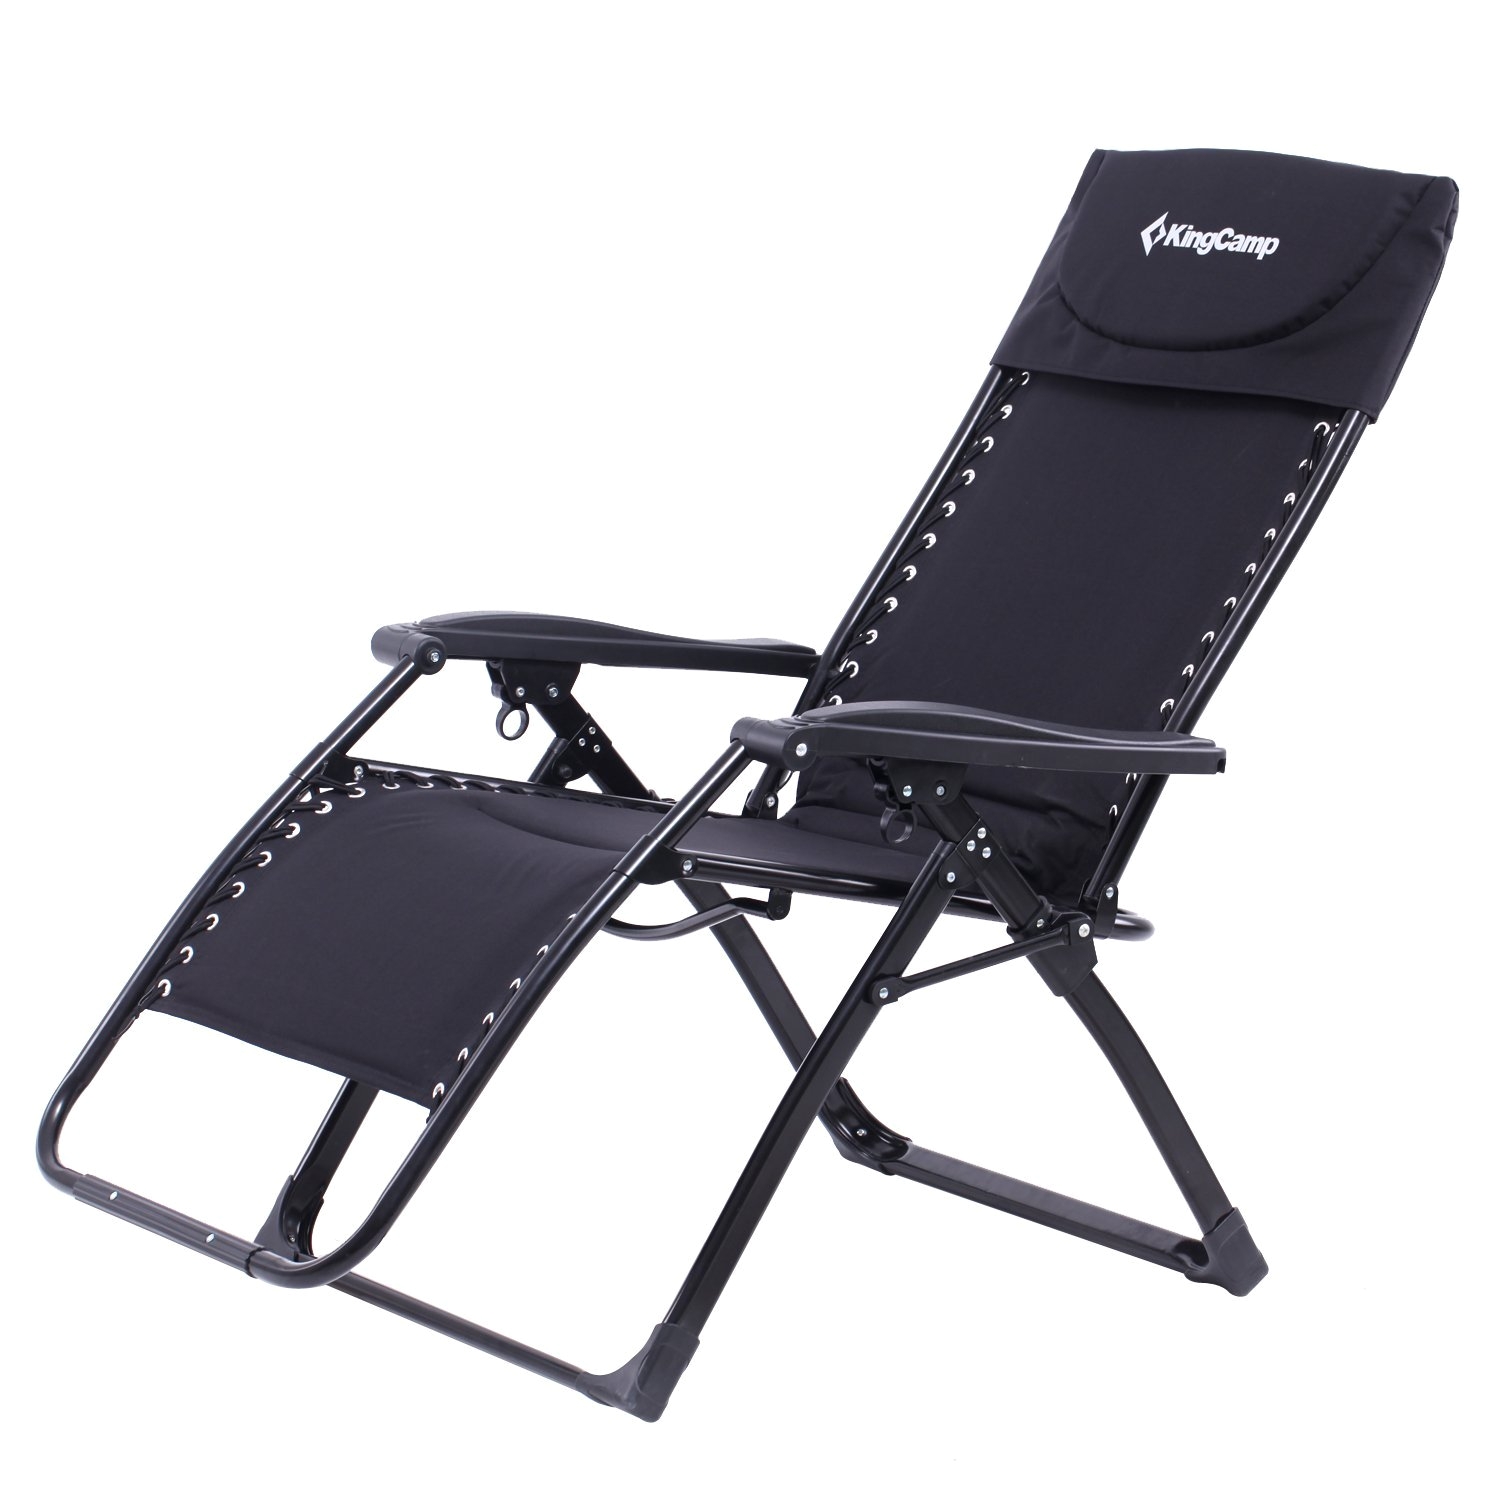 amazon com kingcamp zero gravity patio lounge chair recliner oversized xl padded free adjustment heavy duty square legs with headrest for garden outdoor